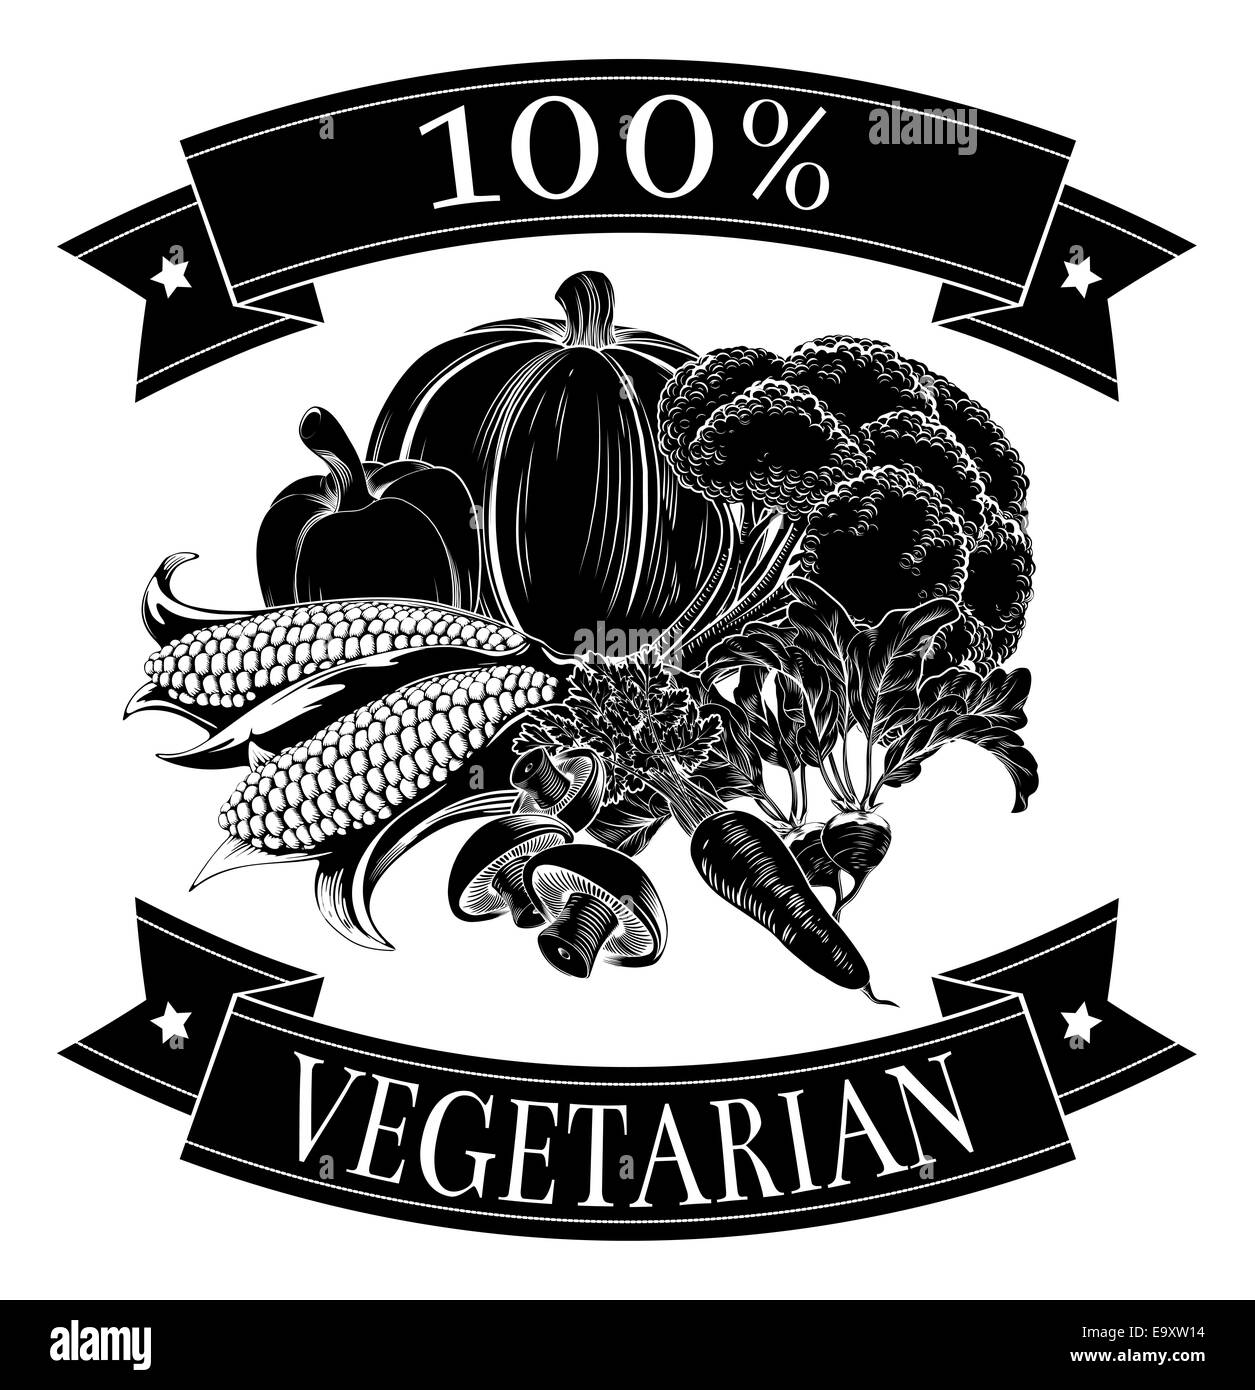 Vegetarian 100 percent label with vegetables and reading 100 percent vegetarian Stock Photo